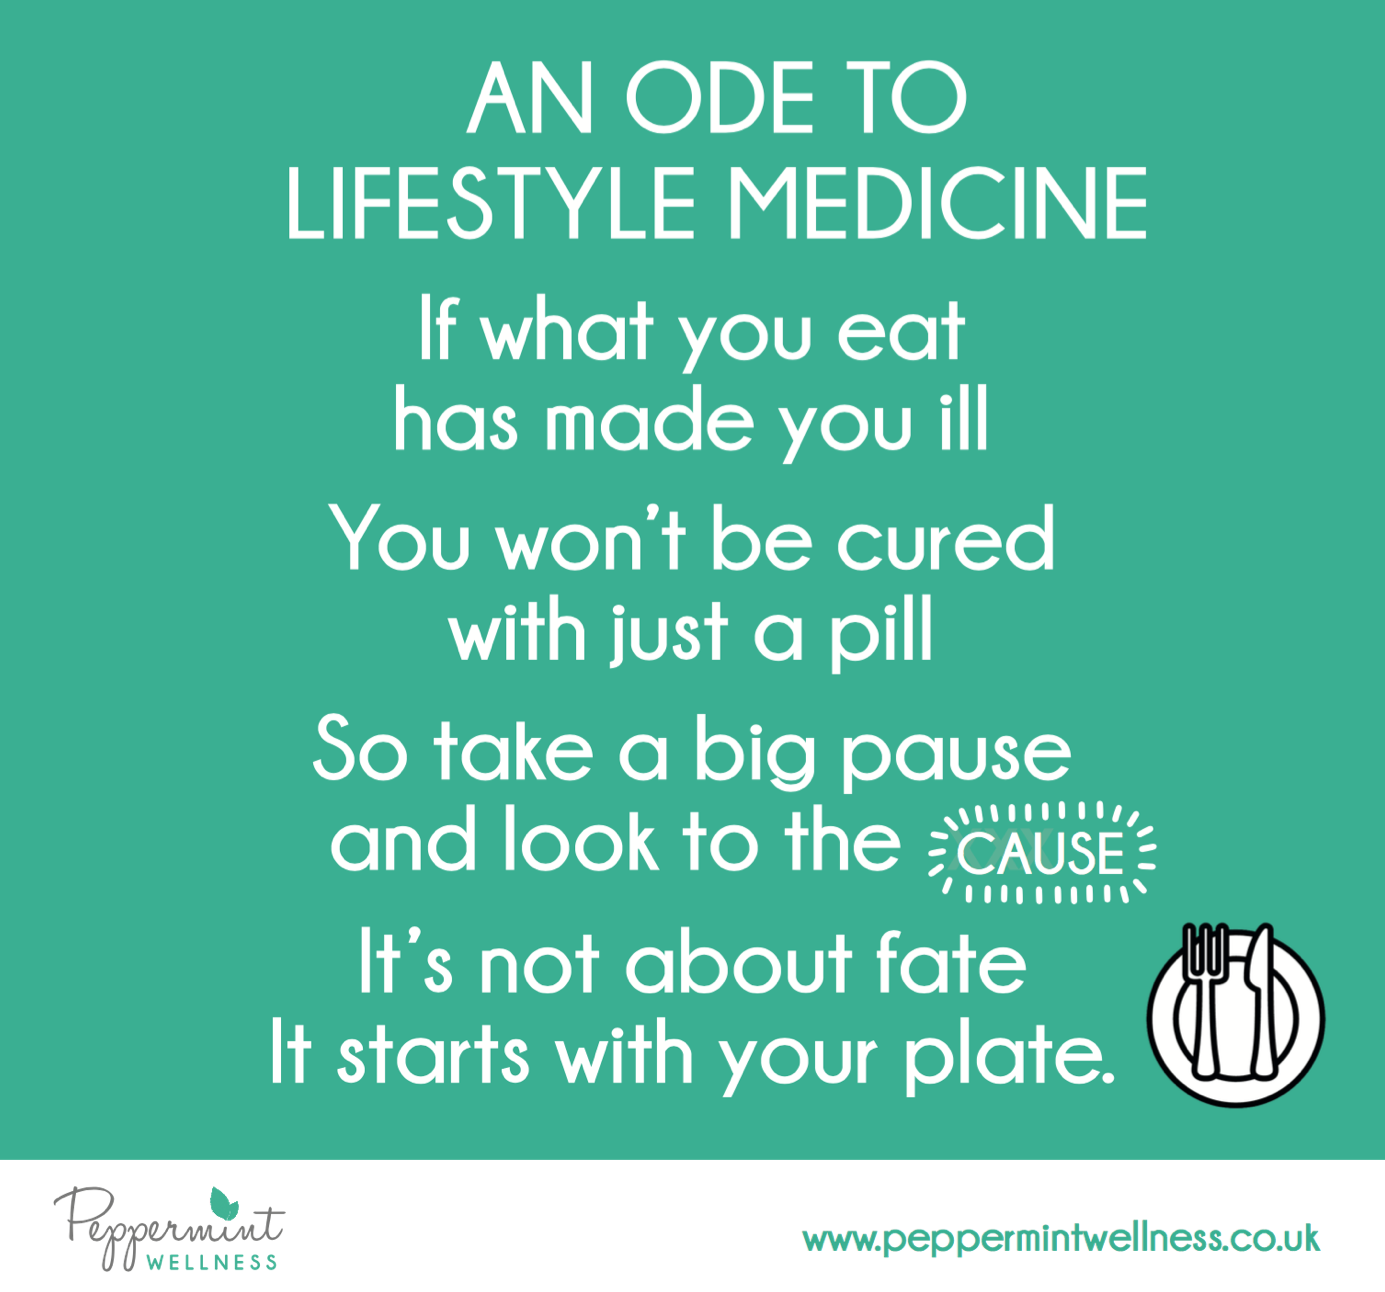 An Ode To Lifestyle Medicine by Peppermint Wellness